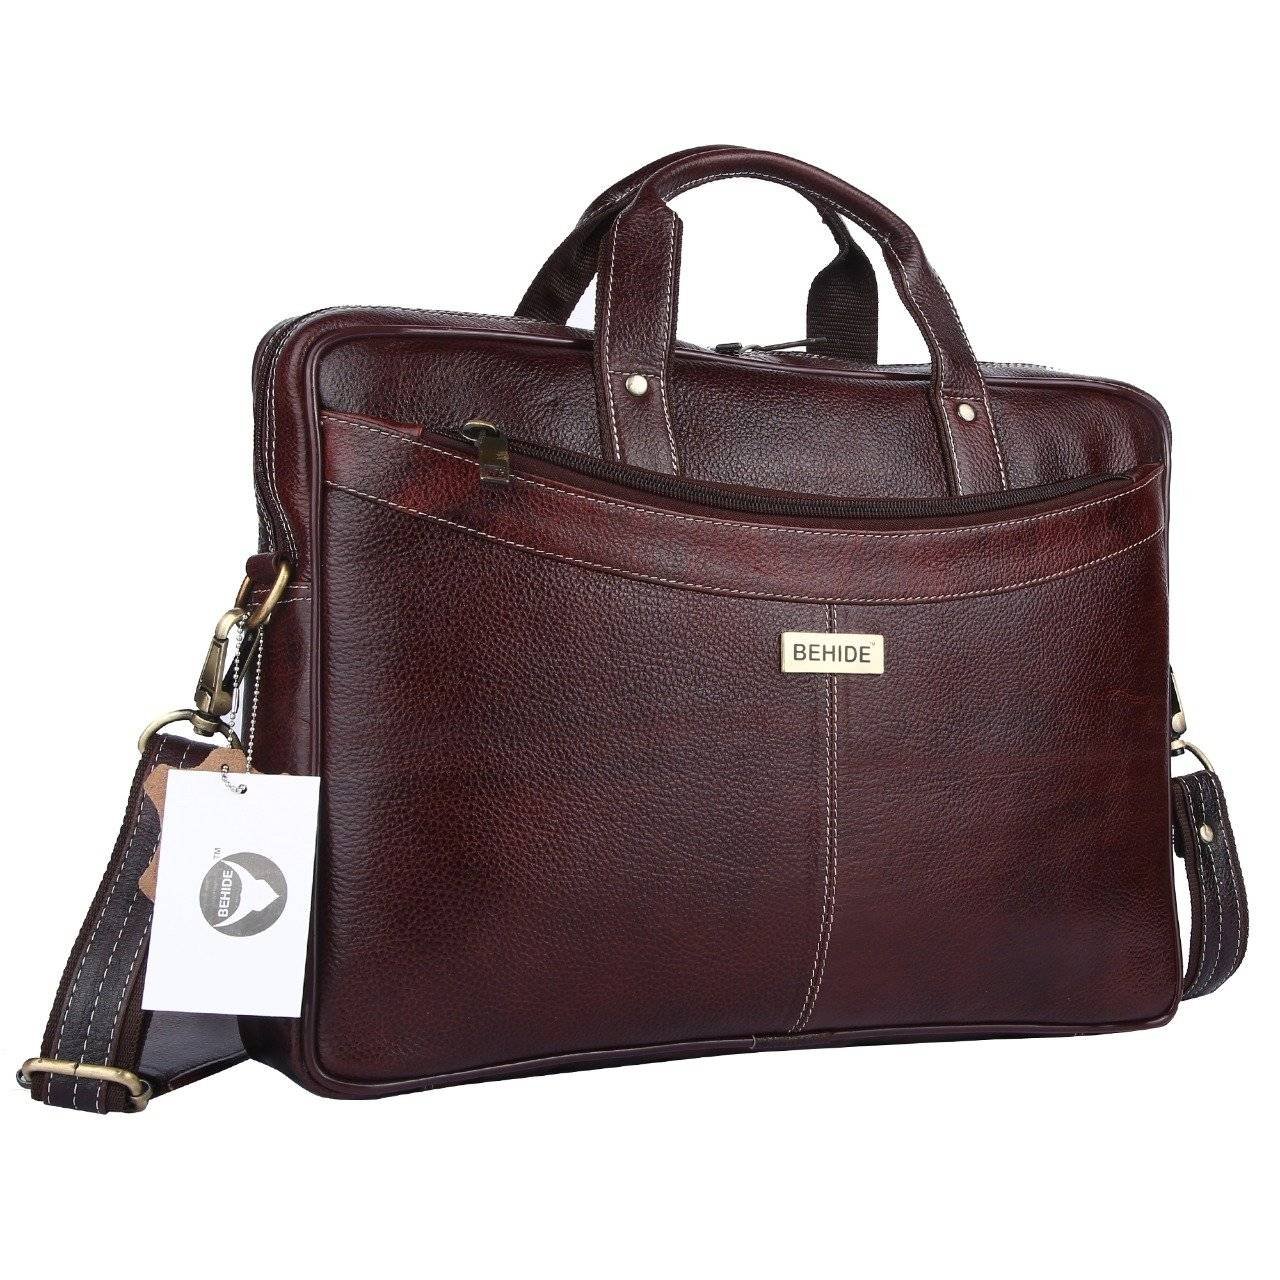 Behide Leather Briefcase | Across Infomedia